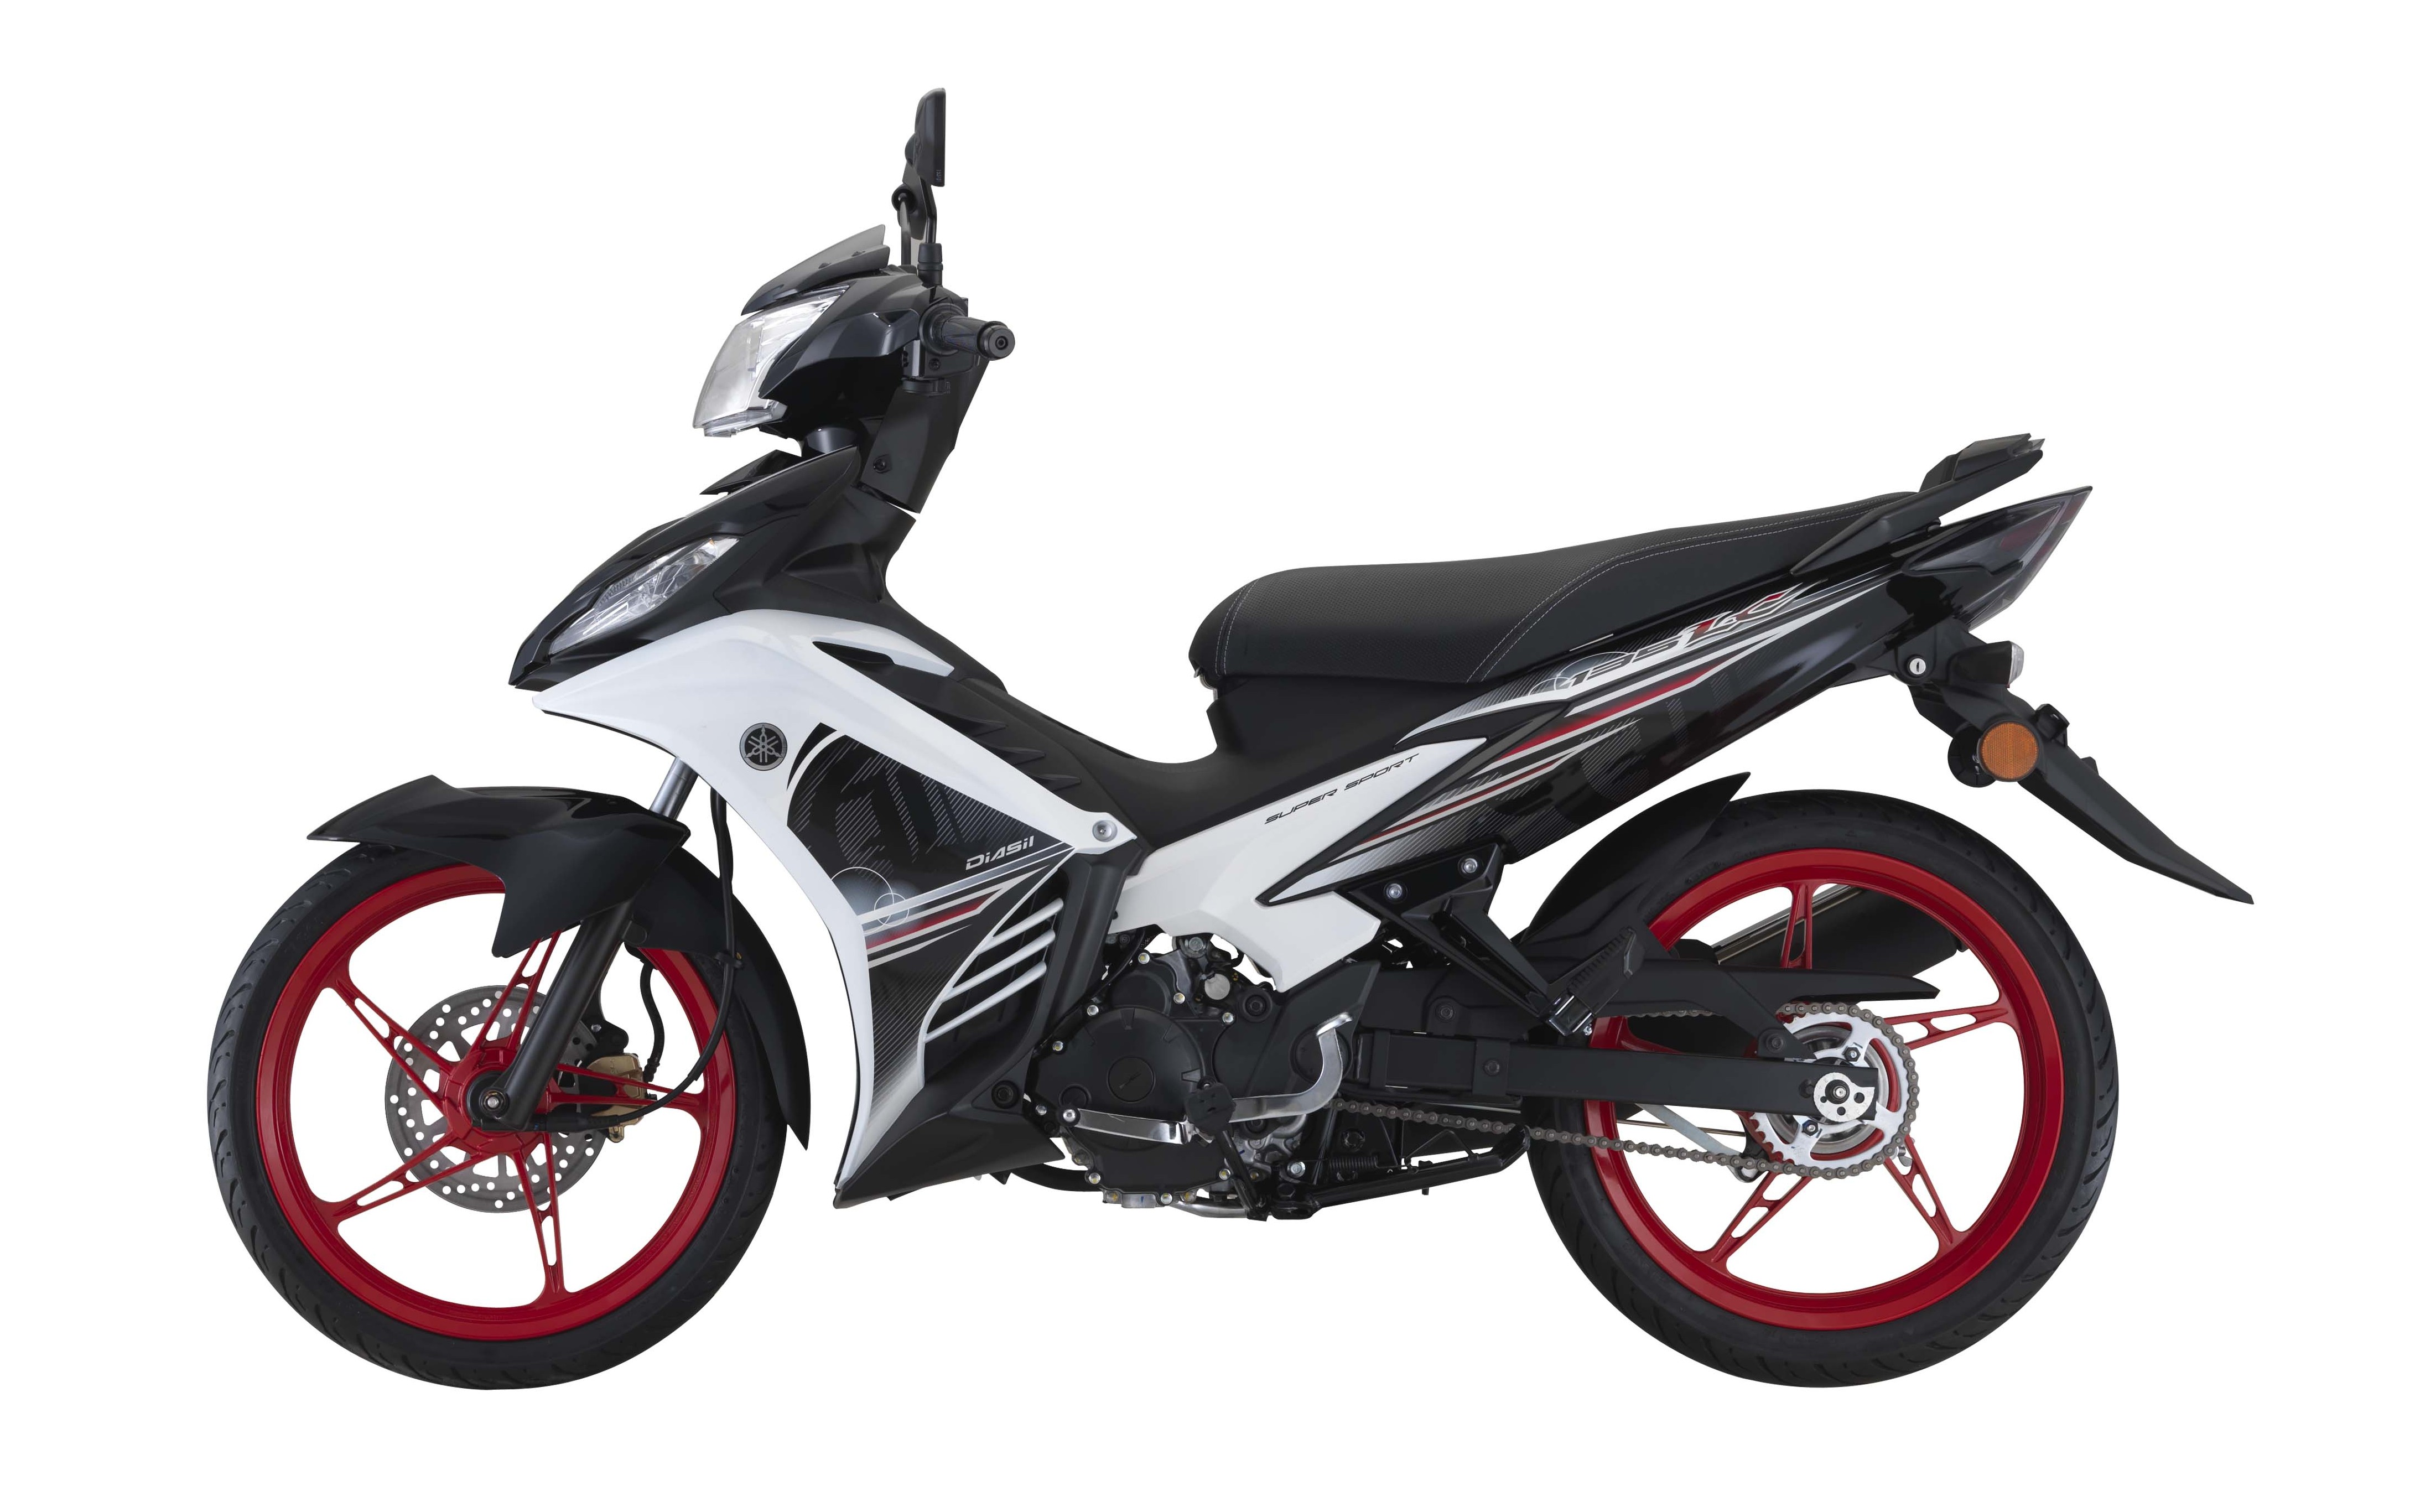 2016 Yamaha 135LC price confirmed, up to RM7,068 Image 439184